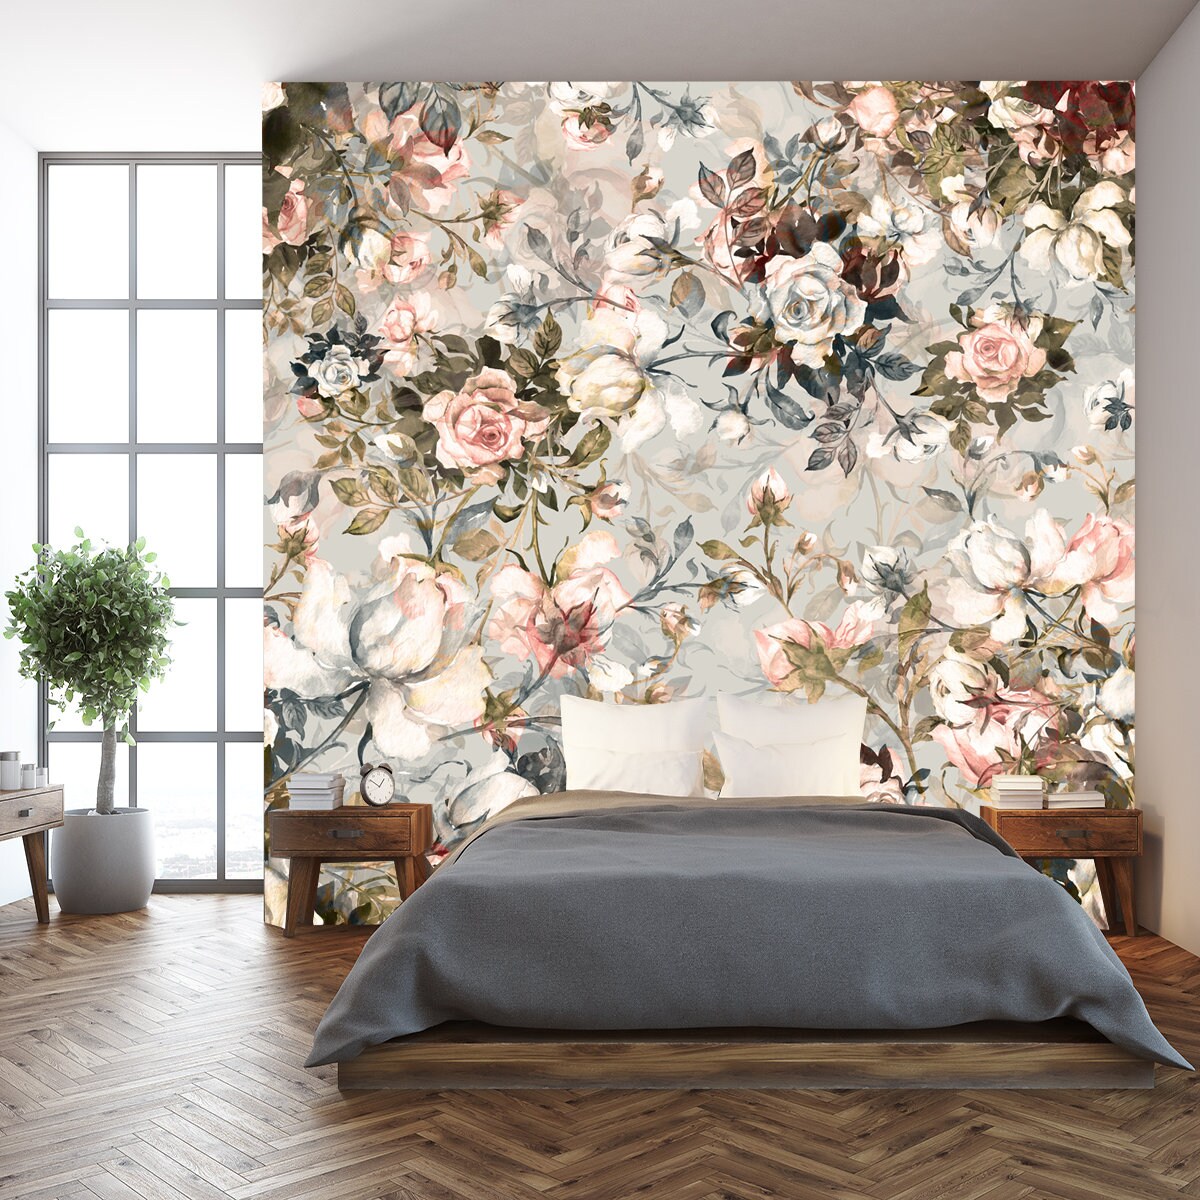 Watercolor Seamless Pattern Bouquet of Roses in Bud Wallpaper Bedroom Mural